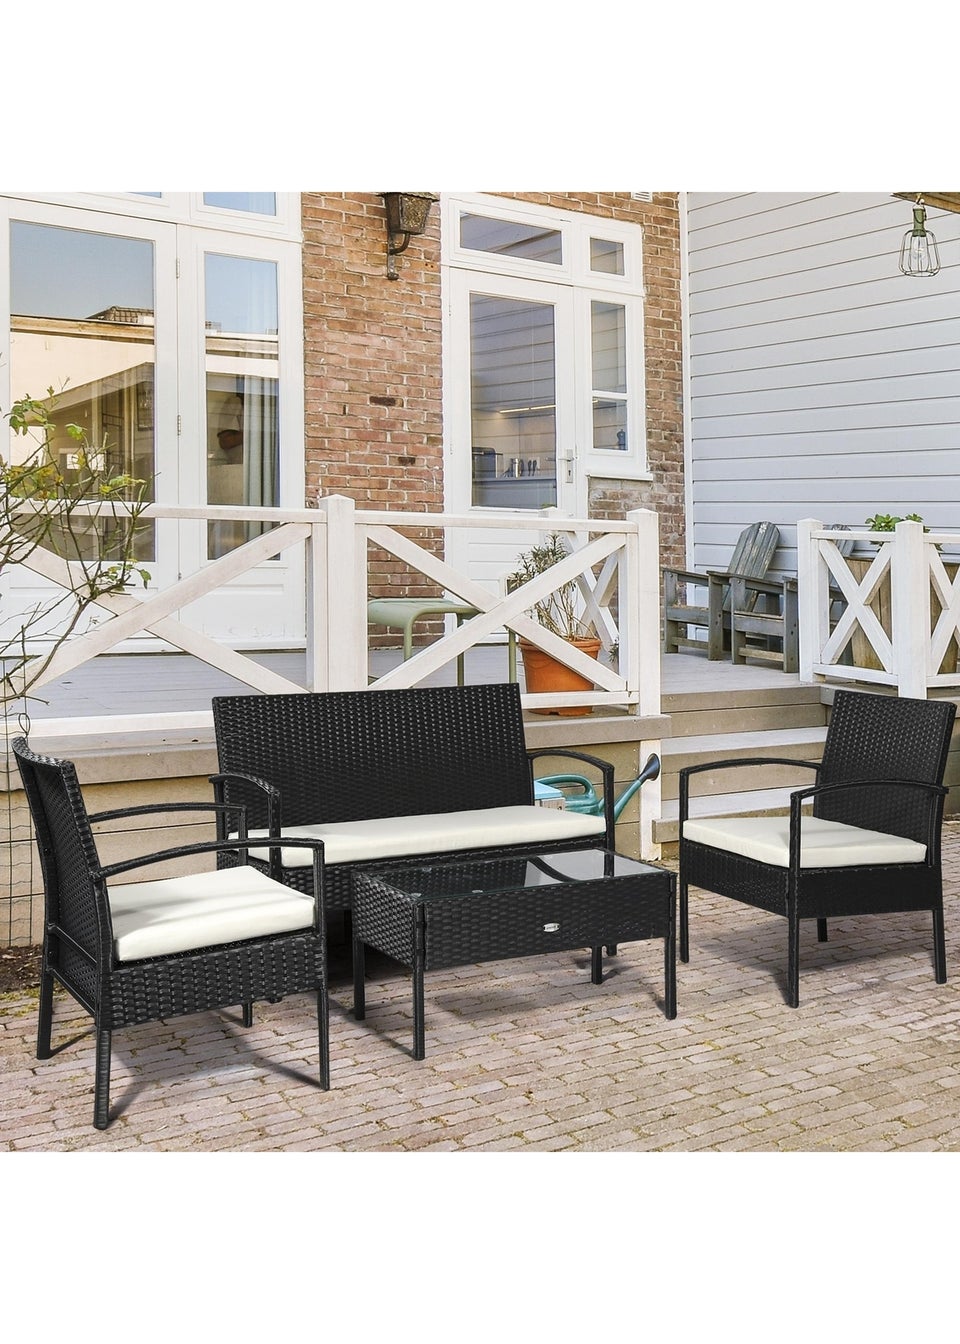 Outsunny 4 Pieces Outdoor PE Rattan Corner Sofa with Cushions, Rattan Garden Furniture Conservatory Sofa Set